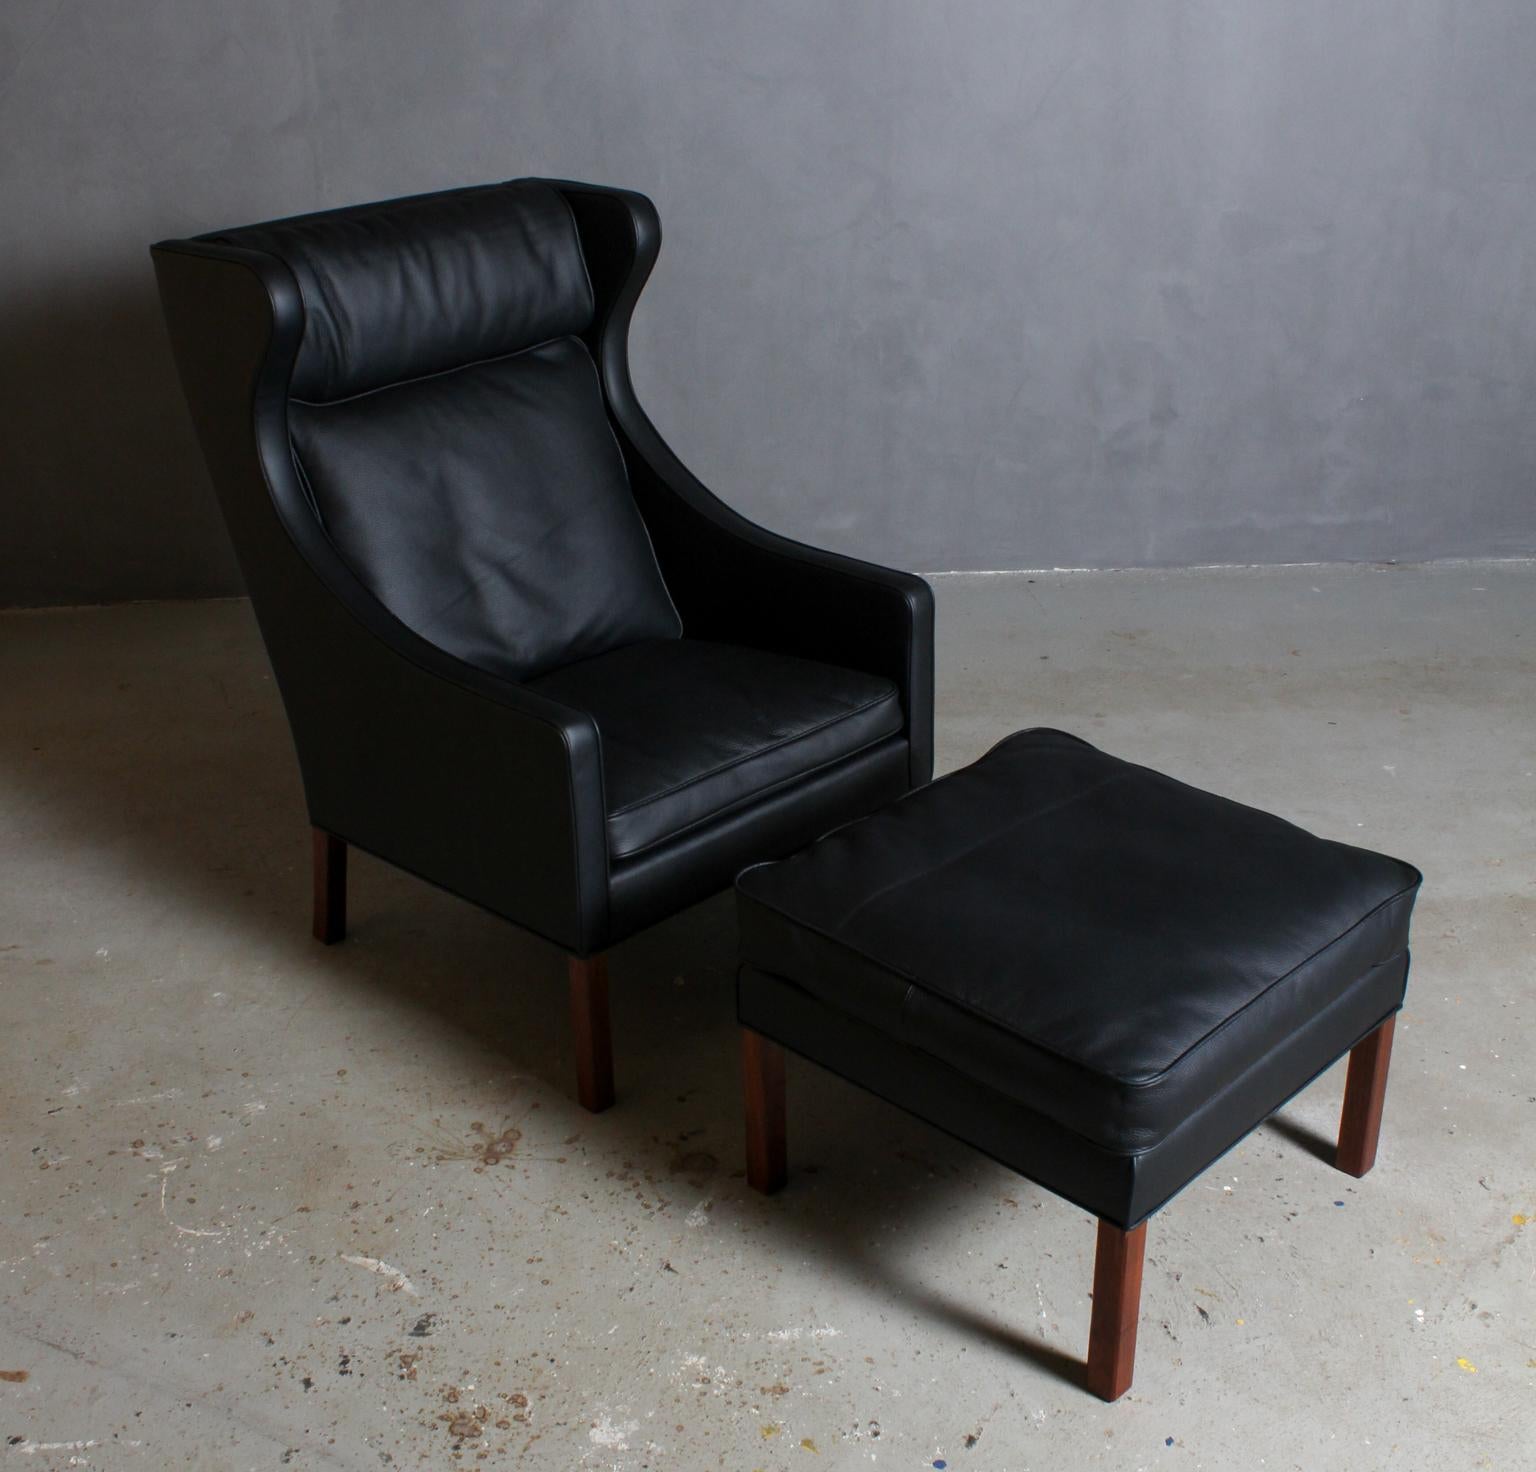 Børge Mogensen wingback chair and ottoman new upholstered with black leather.

Legs of mahogany.

Model 2202 and 2204, made by Fredericia Furniture.